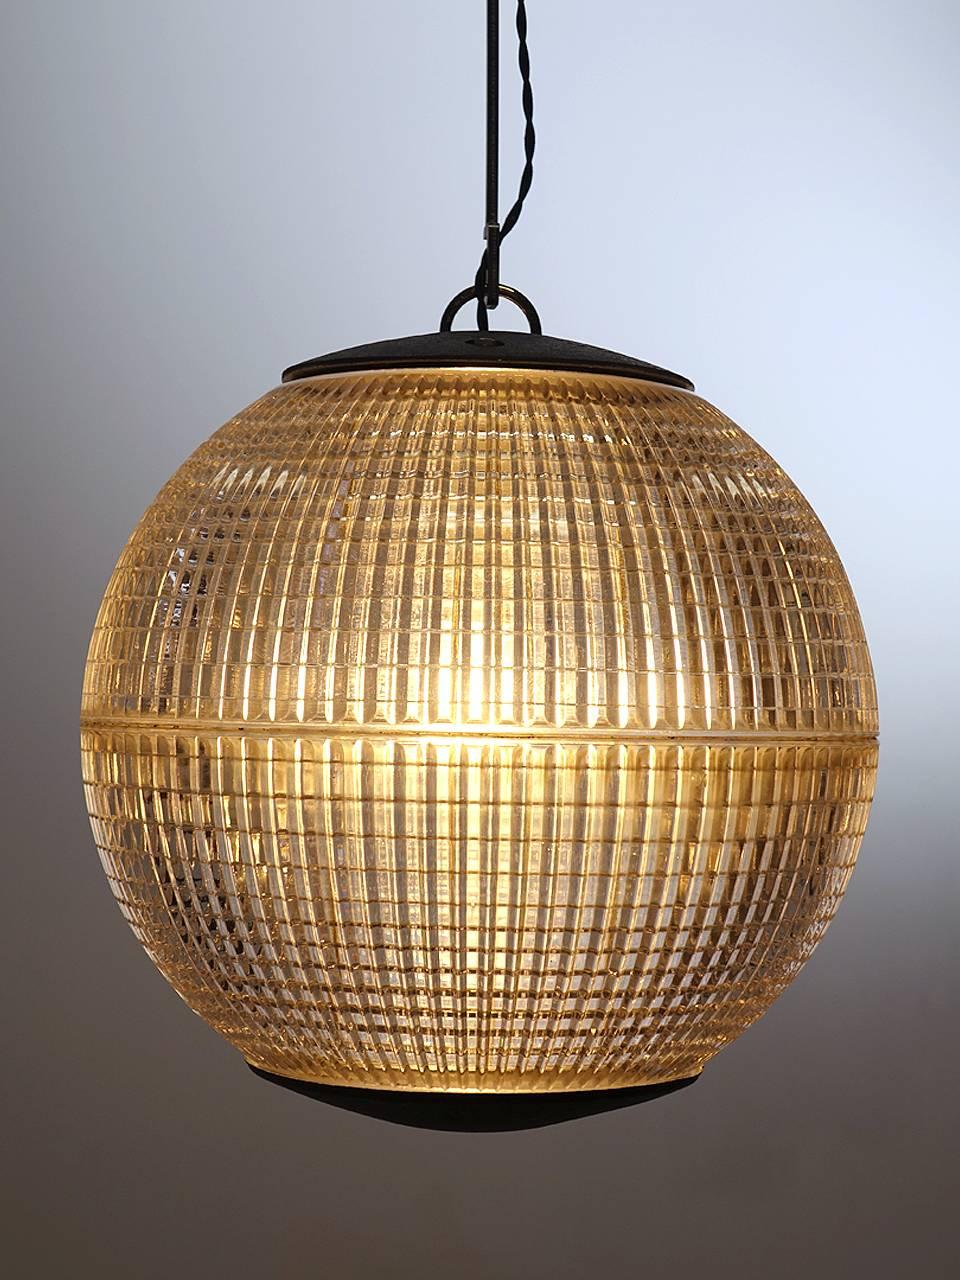 This iconic midcentury prismatic sphere once lighted the thoroughfares of Paris. If you have spent time there you know these lamps well. Since being saved from its lamp post, this Industrial globe has been rewired for modern, indoor use and the end